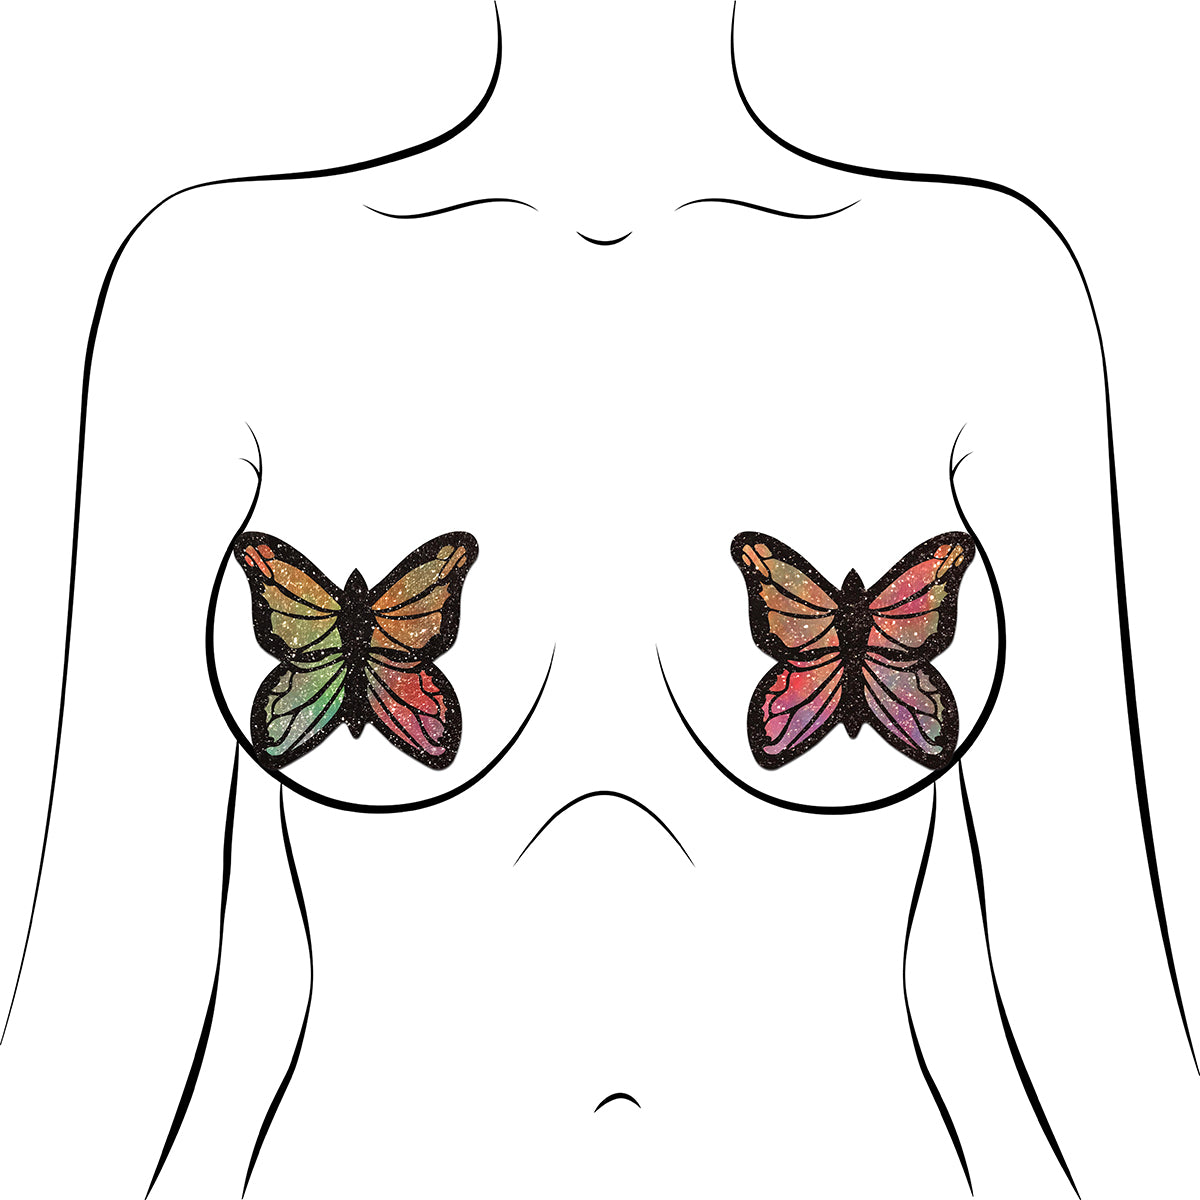 Pastease Butterfly Prism Intimates Adult Boutique